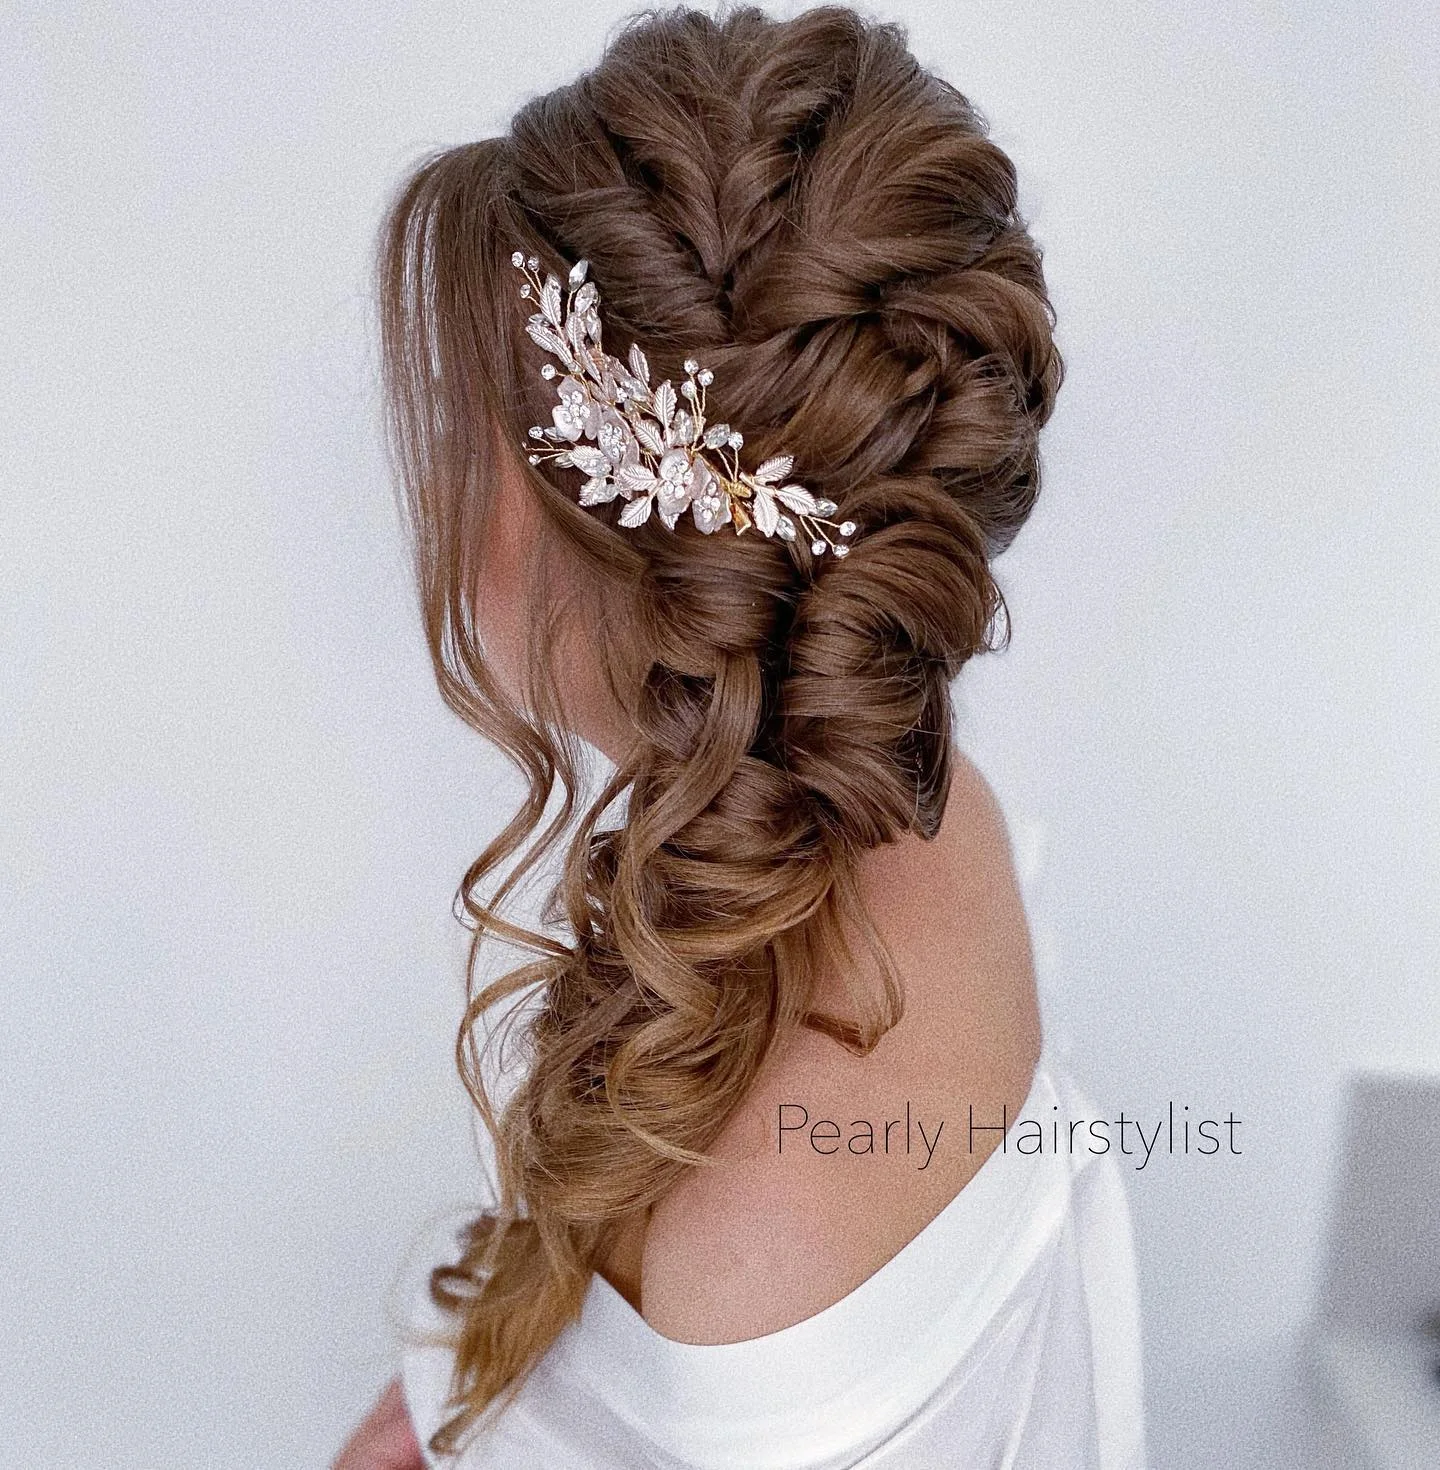 Best-wedding-updo-hairstyles-assymetrical-pearly-hairstylist